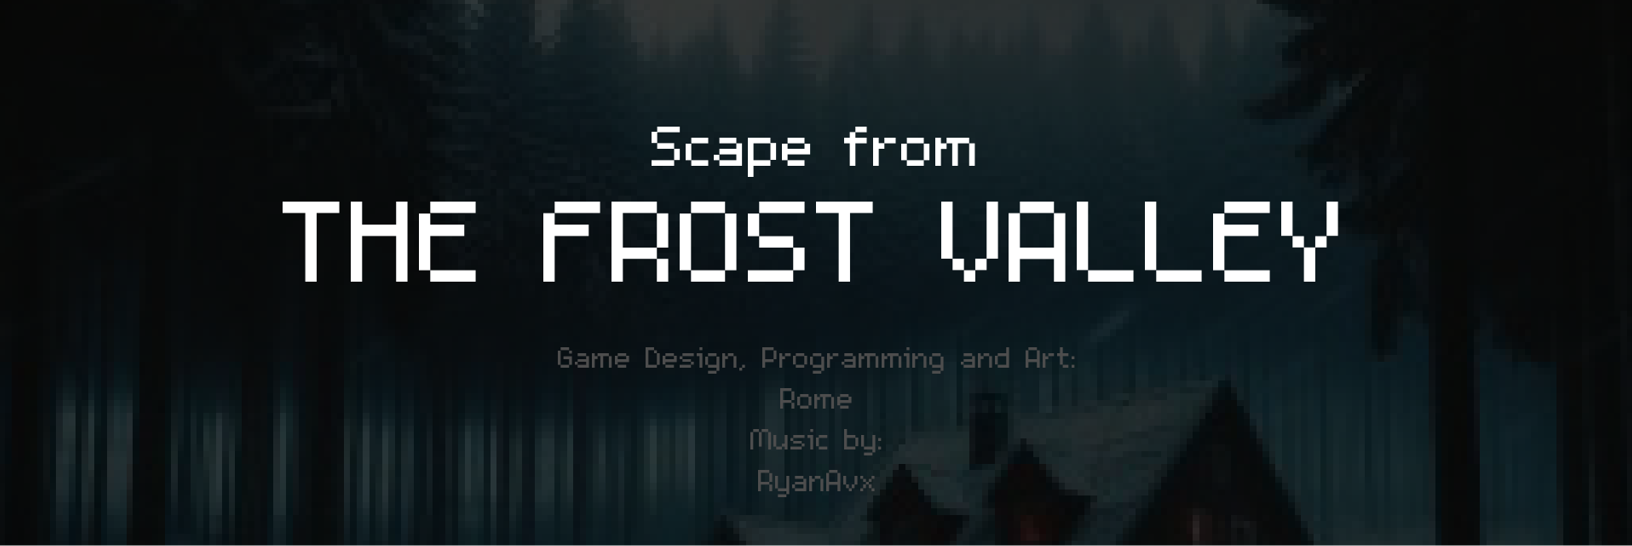 Escape from frost valley